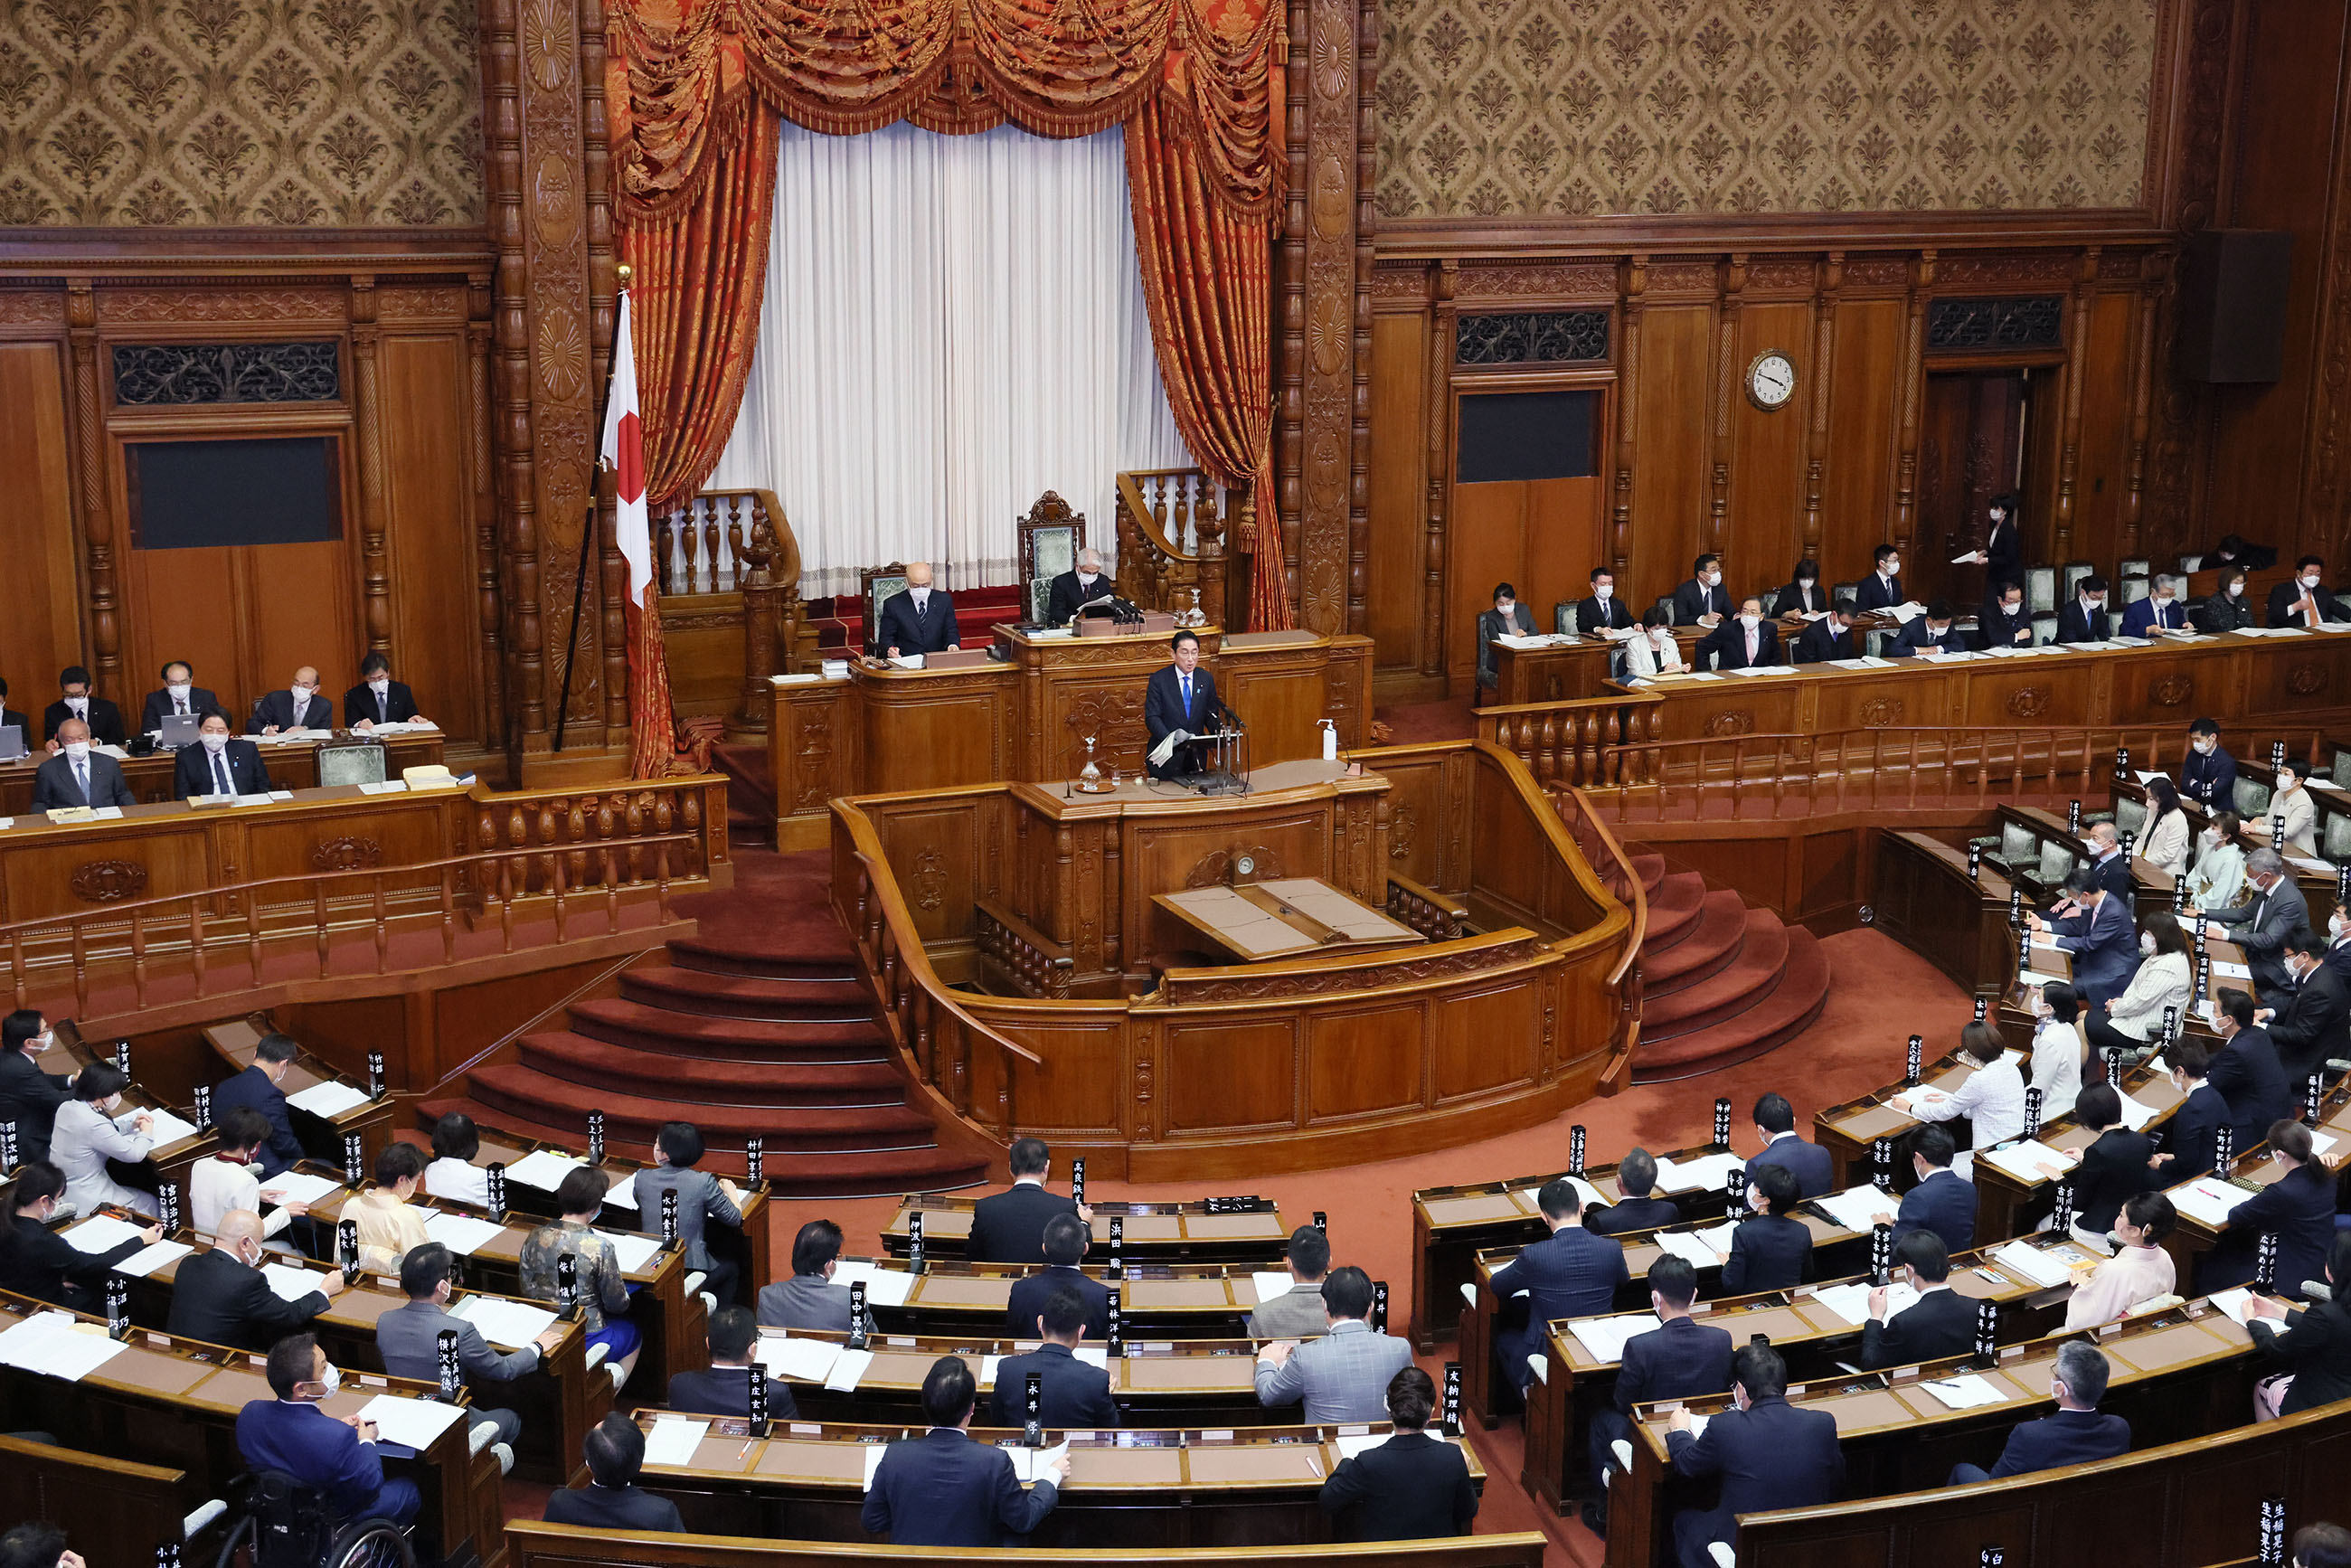 Prime Minister Kishida delivering a policy speech during the plenary session of the House of Councillors (9)